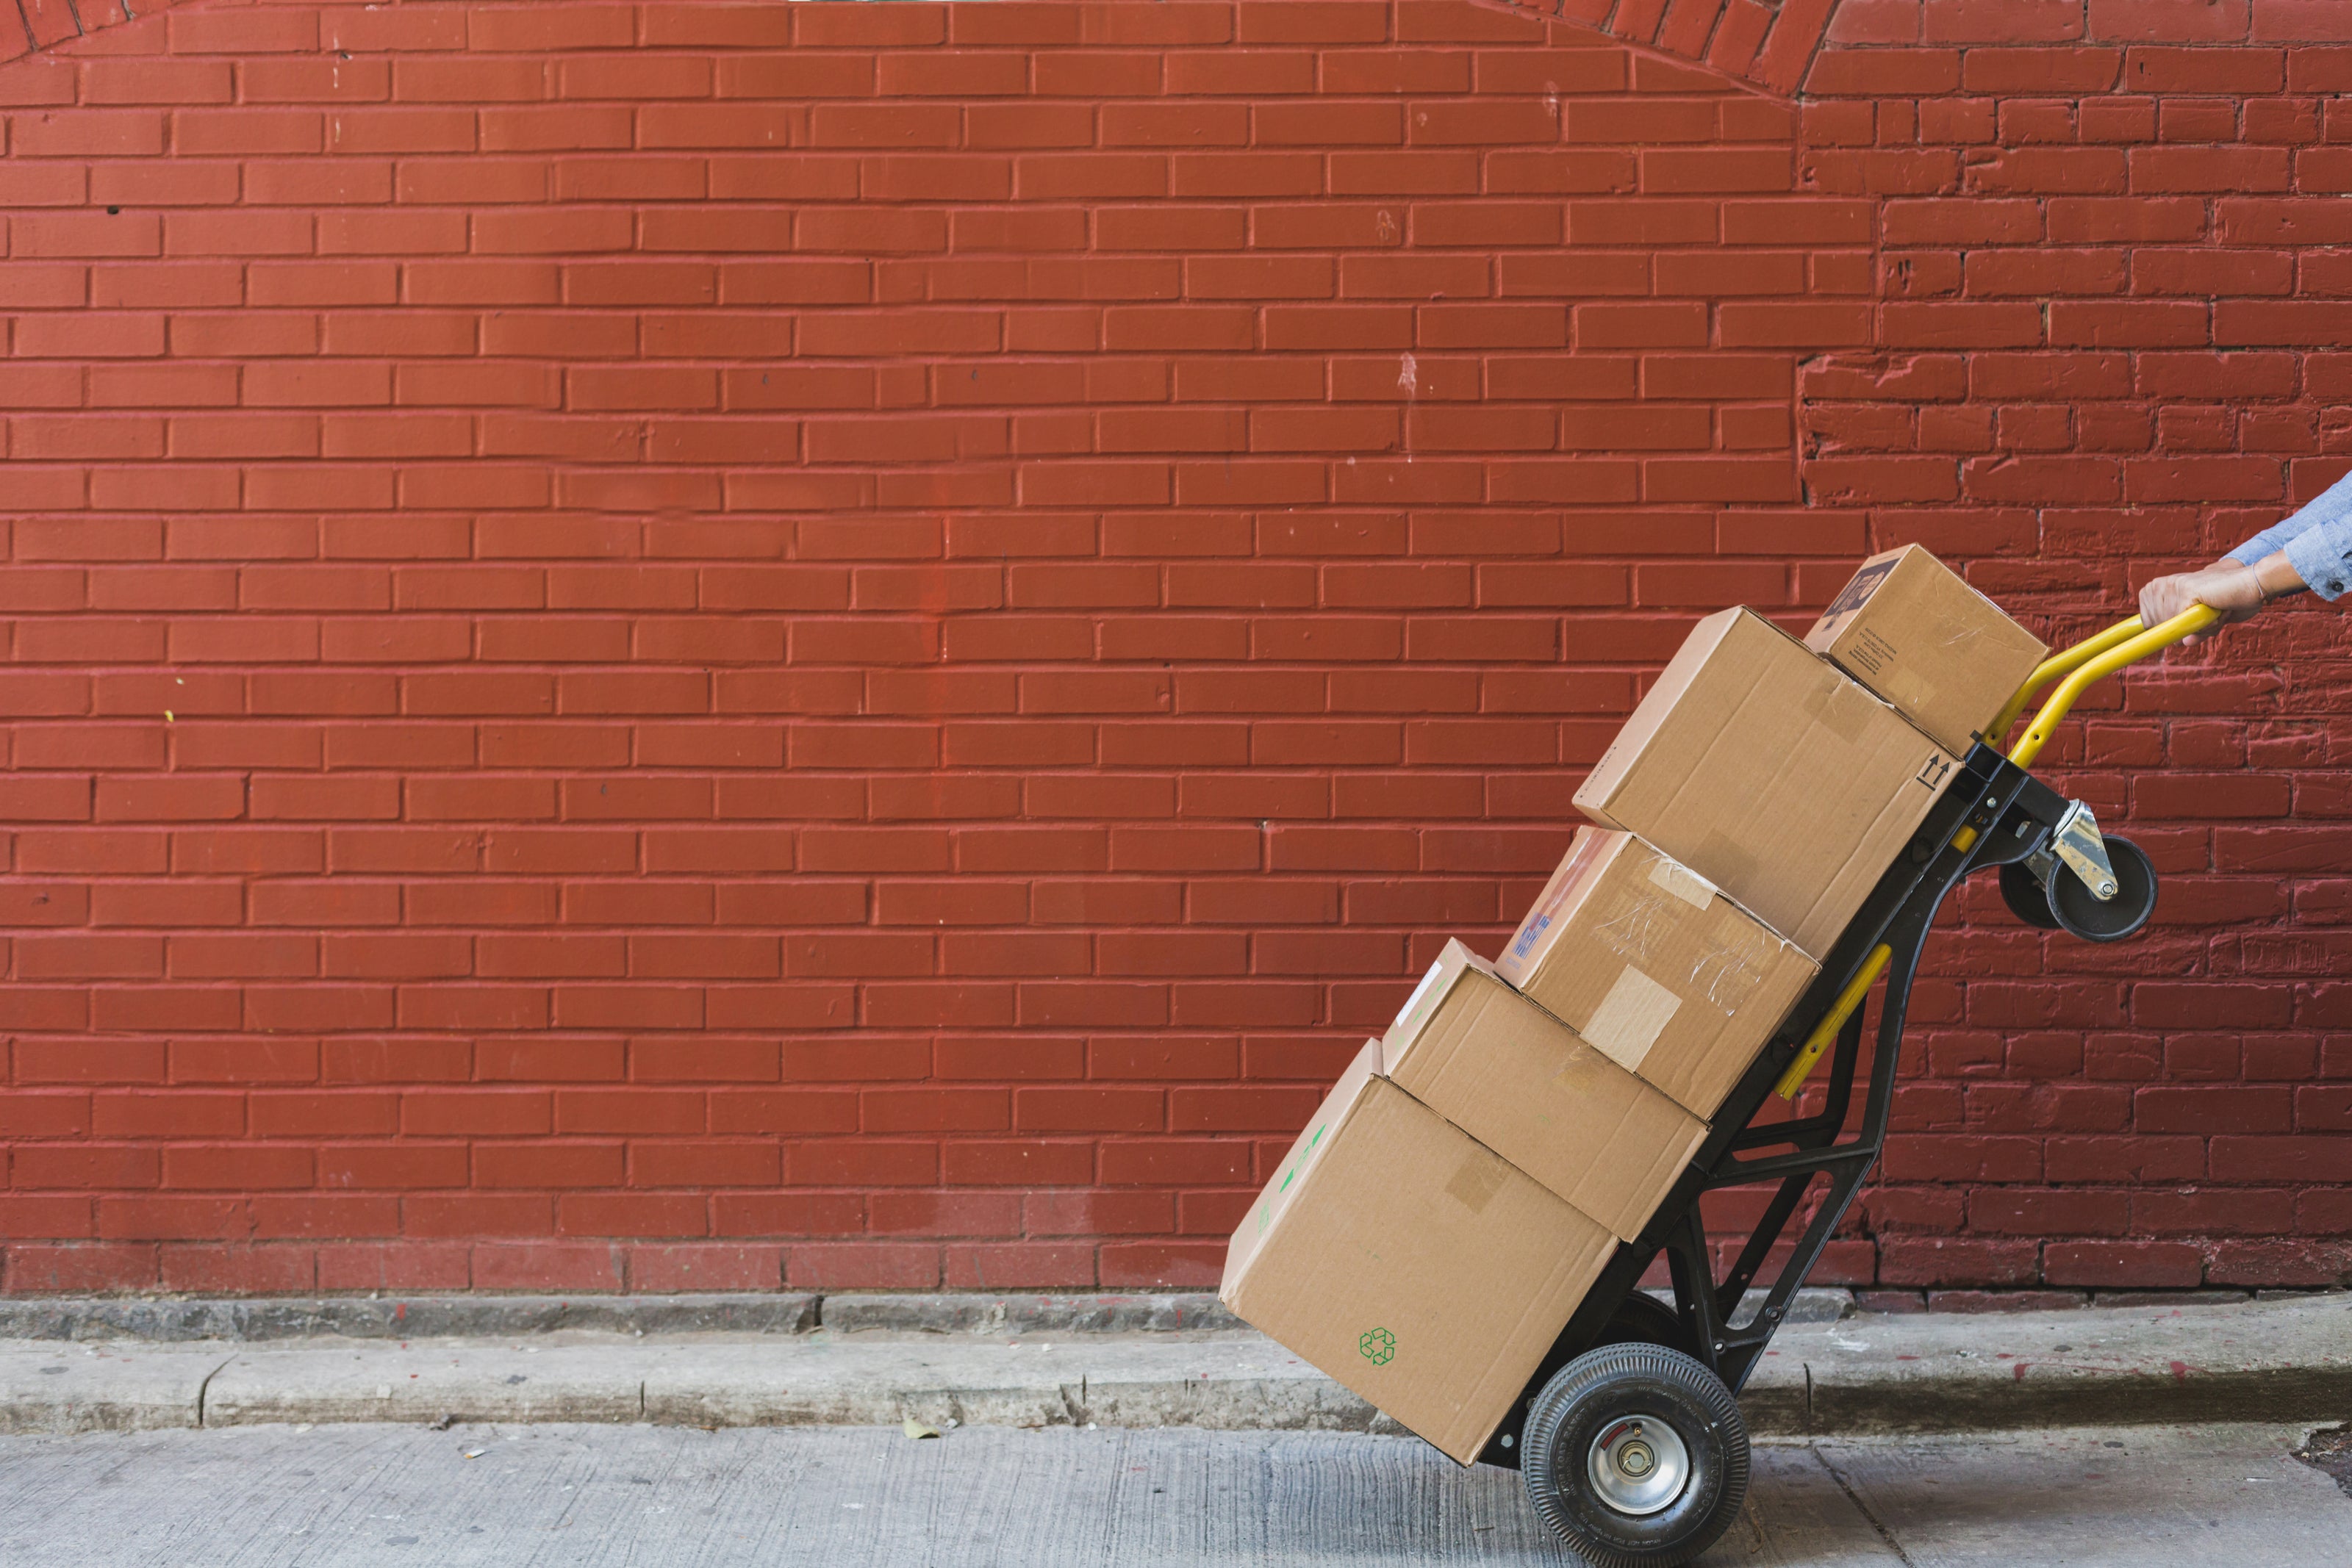 Carboard boxes stacked high on a hand truck. A red brick wall in the background. 